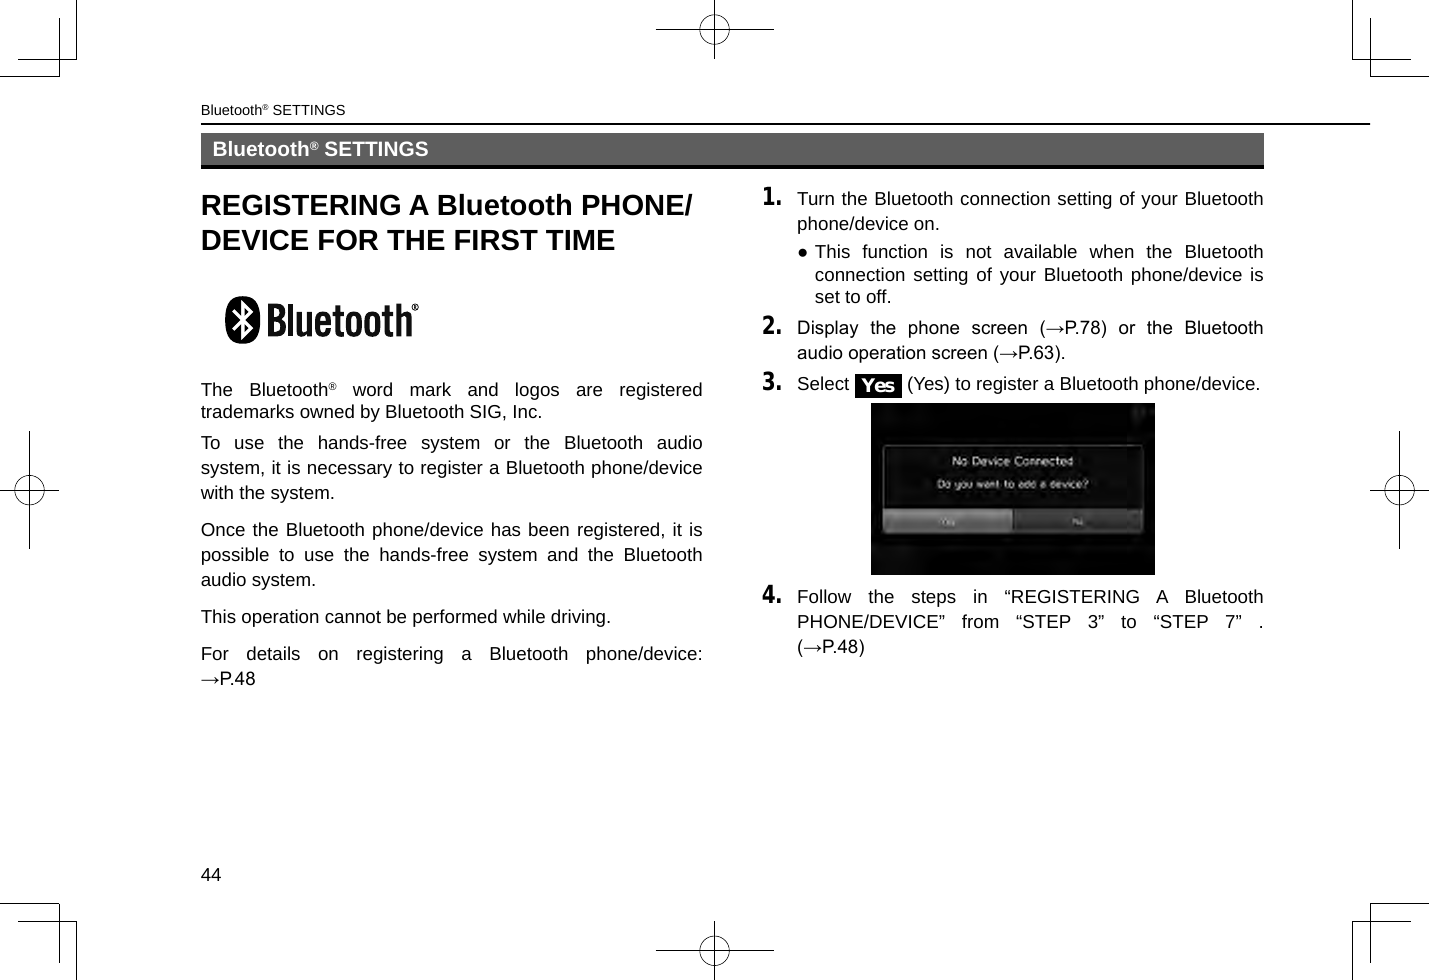 Bluetooth® SETTINGS44Bluetooth® SETTINGSREGISTERING A Bluetooth PHONE/DEVICE FOR THE FIRST TIMEThe Bluetooth® word mark and logos are registered trademarks owned by Bluetooth SIG, Inc.To use the hands-free system or the Bluetooth audio system, it is necessary to register a Bluetooth phone/device with the system.Once the Bluetooth phone/device has been registered, it is possible to use the hands-free system and the Bluetooth audio system.This operation cannot be performed while driving.For details on registering a Bluetooth phone/device: →P.481. Turn the Bluetooth connection setting of your Bluetooth phone/device on. ●This function is not available when the Bluetooth connection setting of your Bluetooth phone/device is set to off.2. Display  the  phone  screen  (→P.78)  or  the  Bluetooth audio operation screen (→P.63).3. Select Yes (Yes) to register a Bluetooth phone/device.4. Follow the steps in “REGISTERING A Bluetooth PHONE/DEVICE” from “STEP 3” to “STEP 7” . (→P.48)